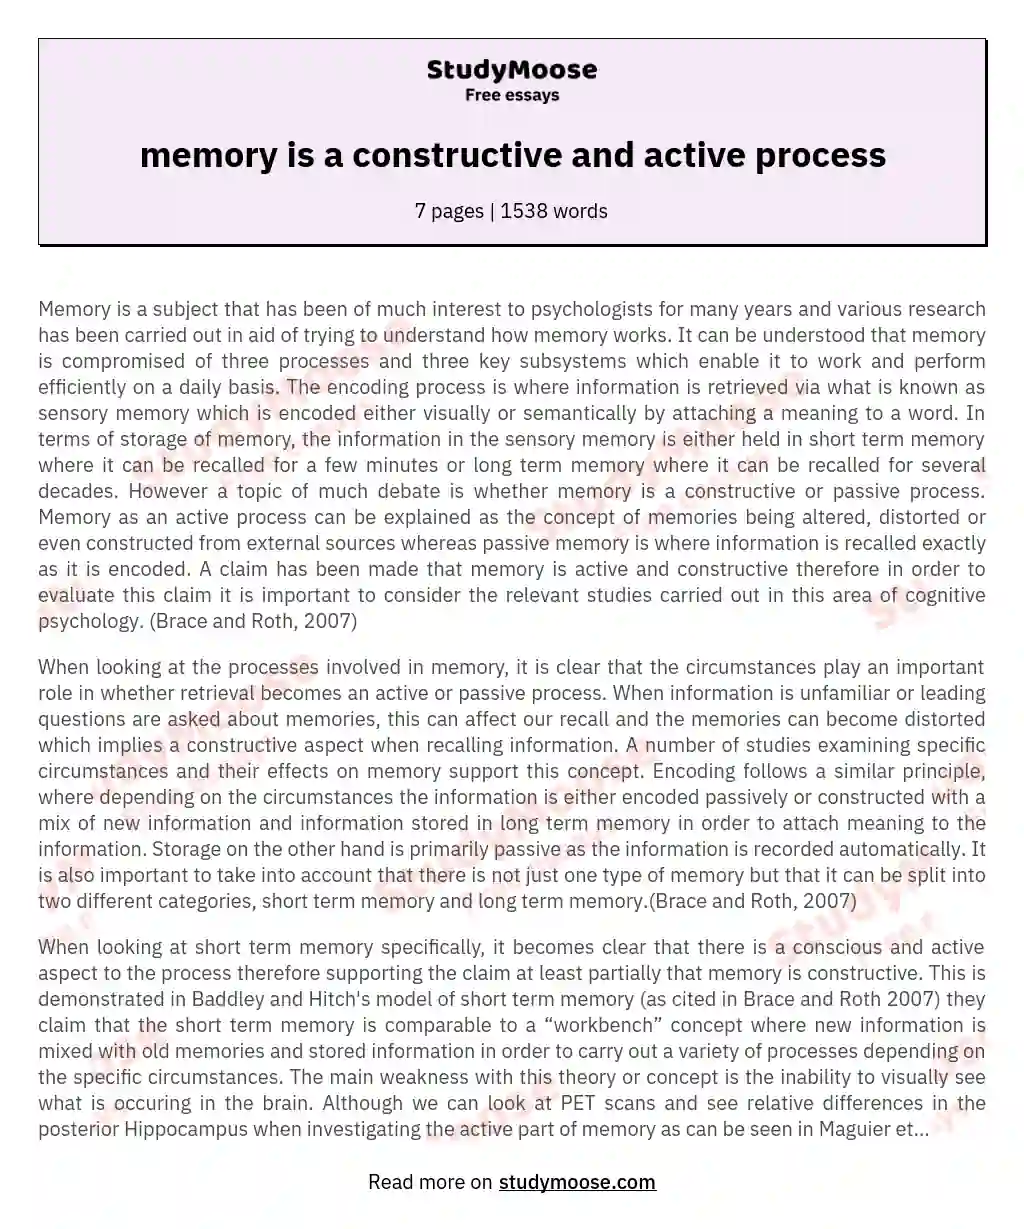 memory is a constructive and active process